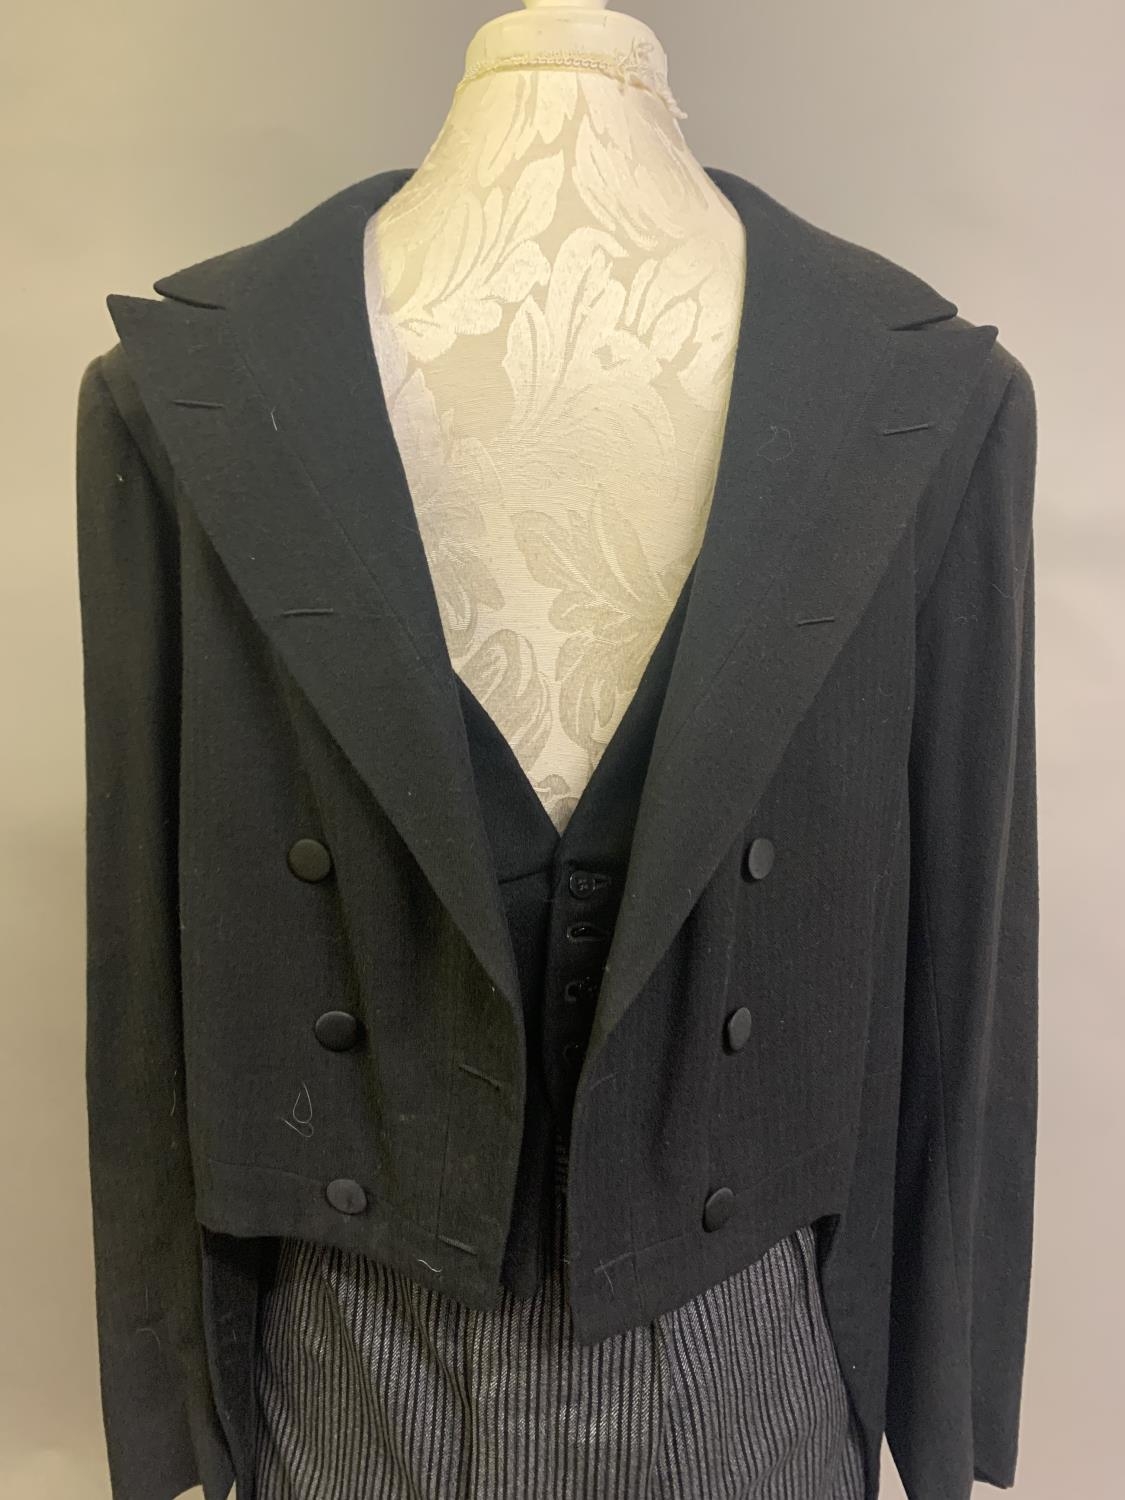 A gentleman’s vintage 3-piece morning suit with striped trousers and waistcoat, fairly large size - Image 2 of 6